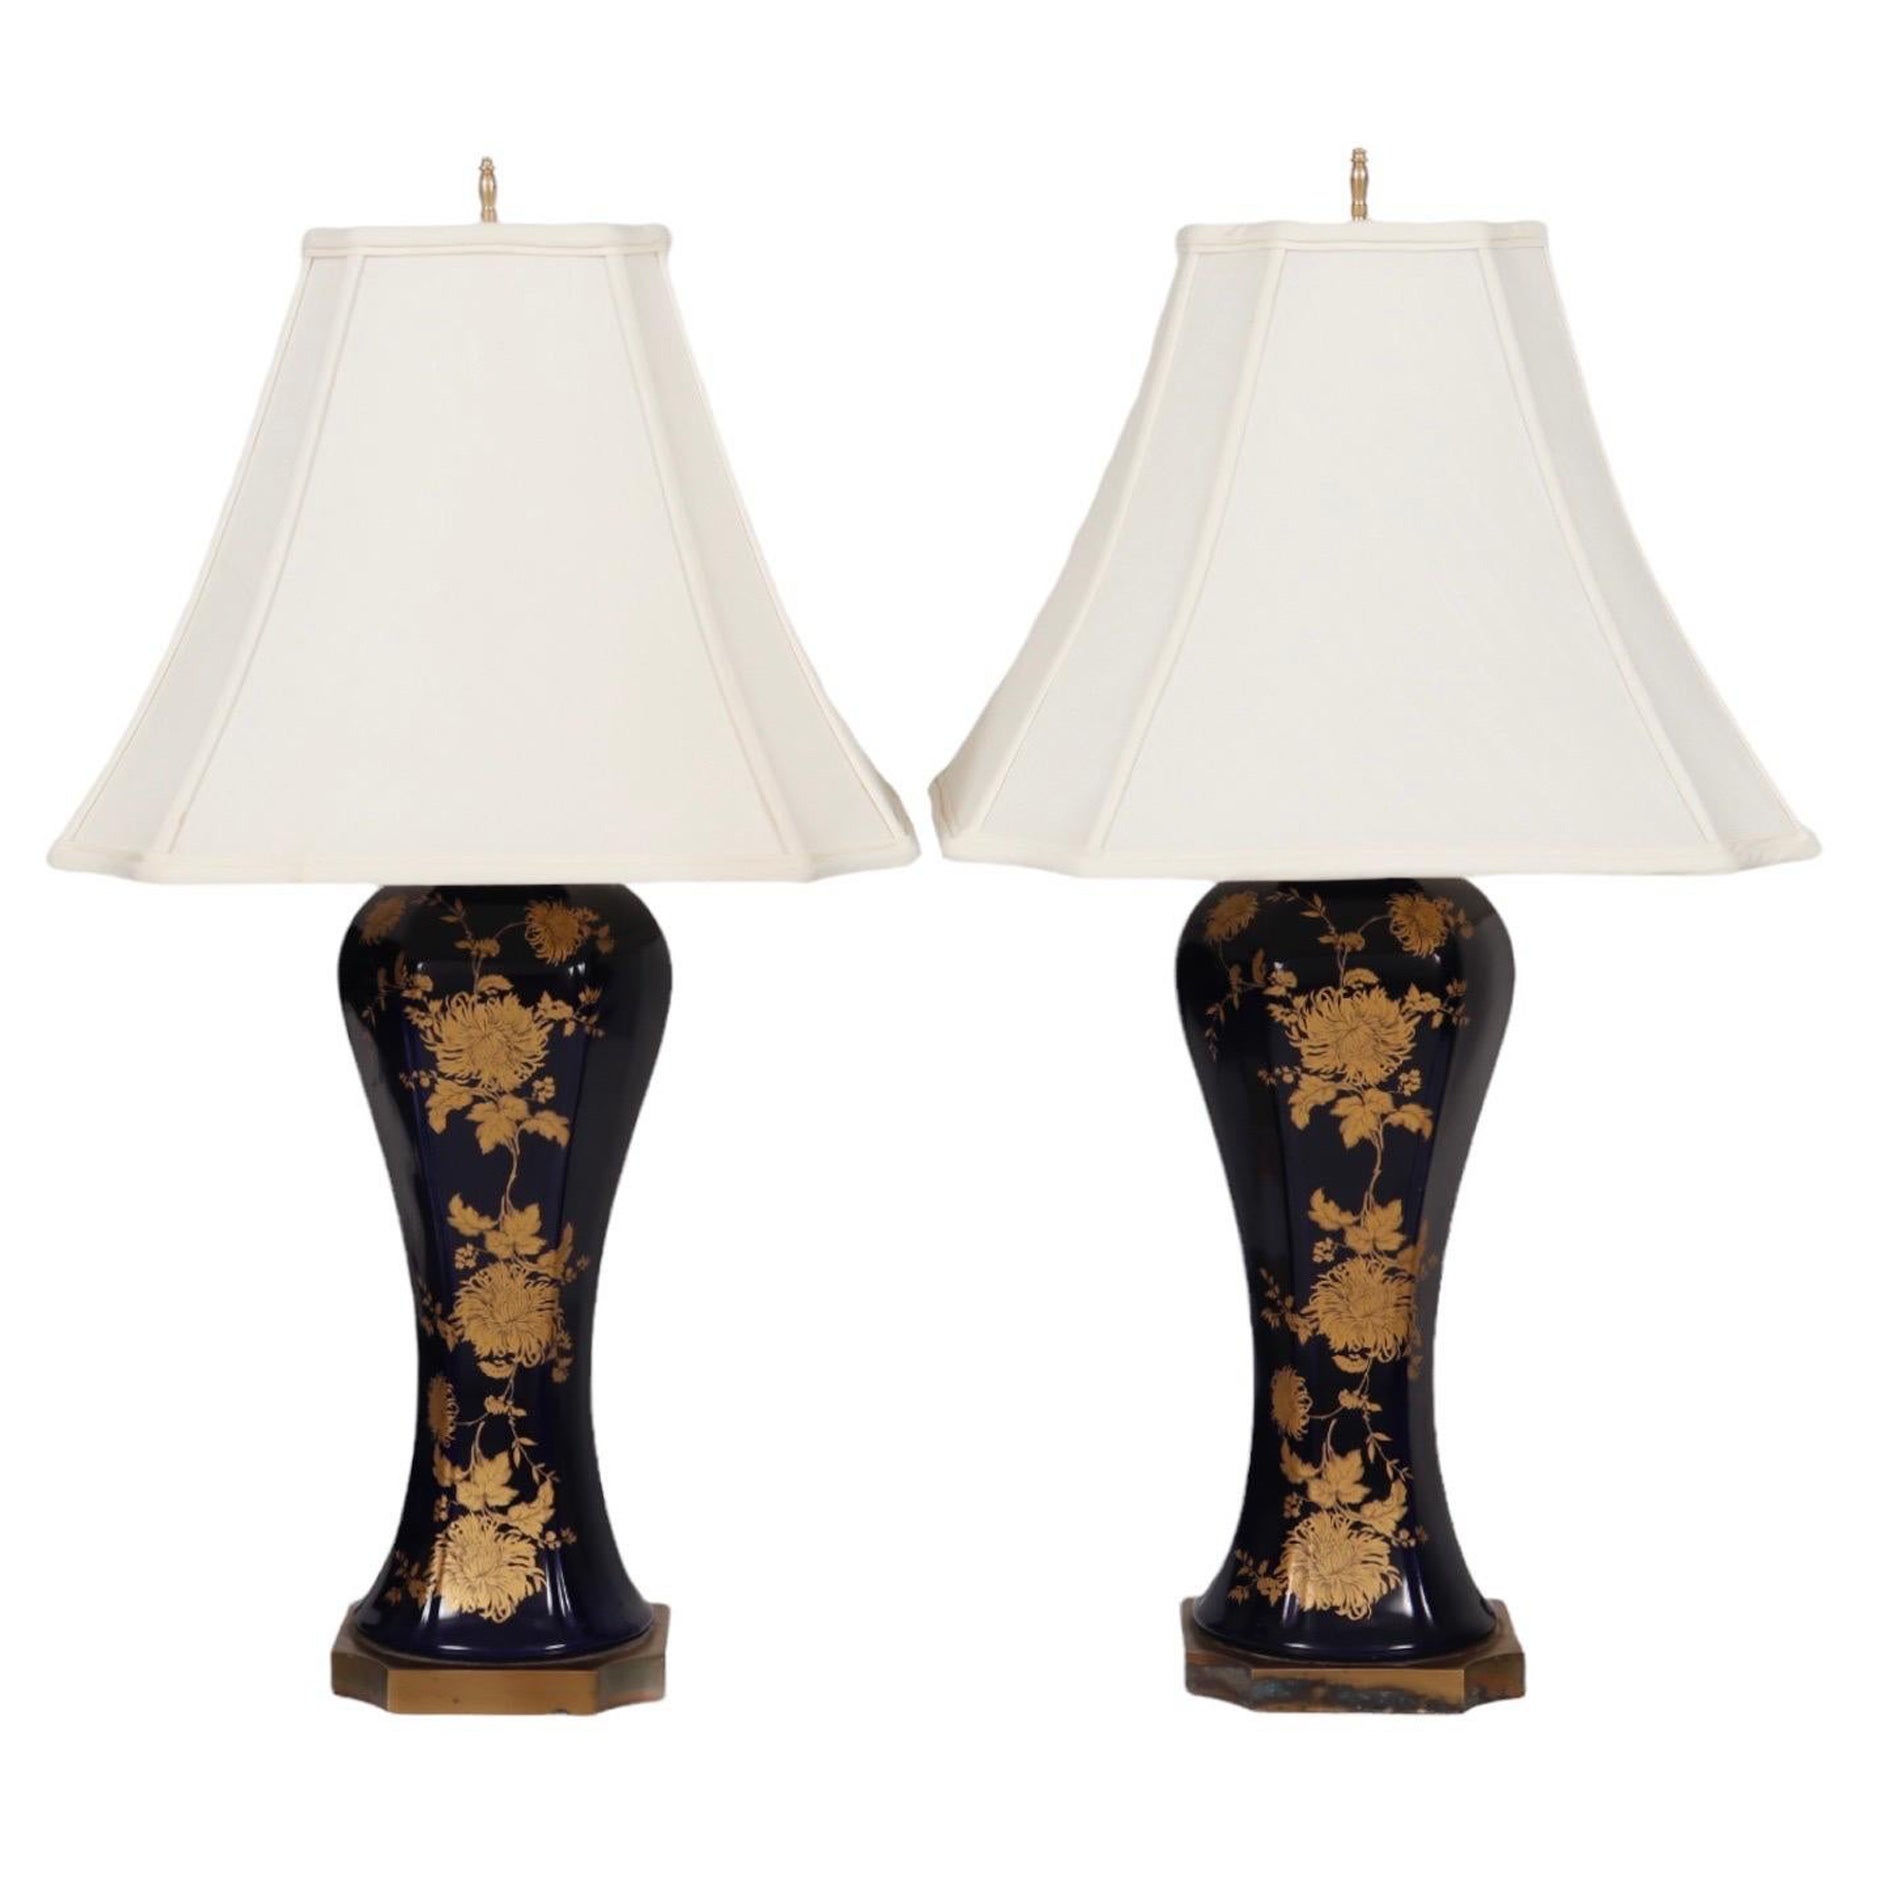 Japanese Style Ceramic Table Lamps, a Pair For Sale